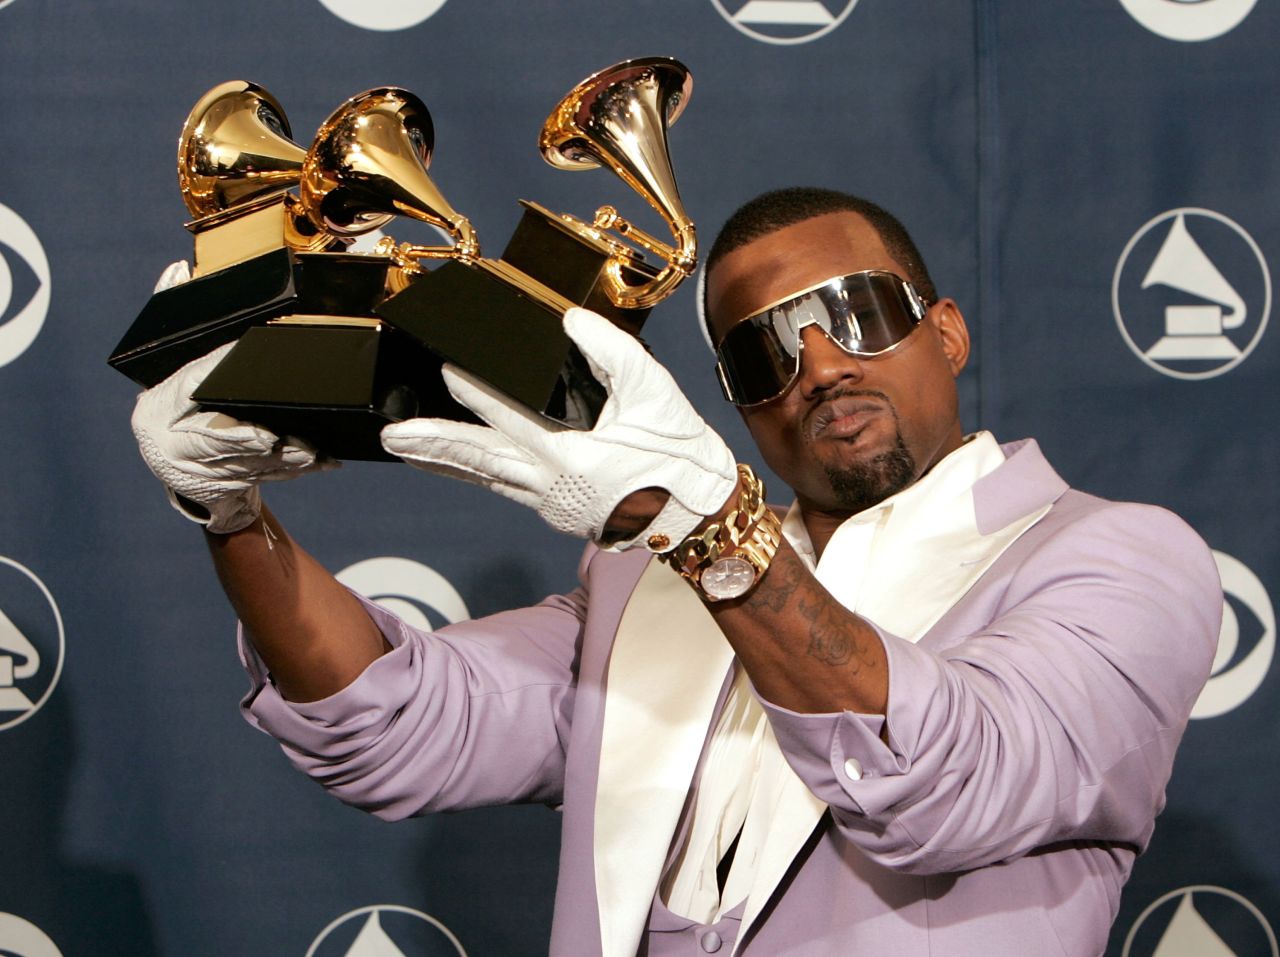 West poses with his awards at the 2006 Grammys. His second album, "Late Registration," won Best Rap Album. "Diamonds from Sierra Leone" won Best Rap Song, and "Gold Digger" won Best Rap Solo Performance.